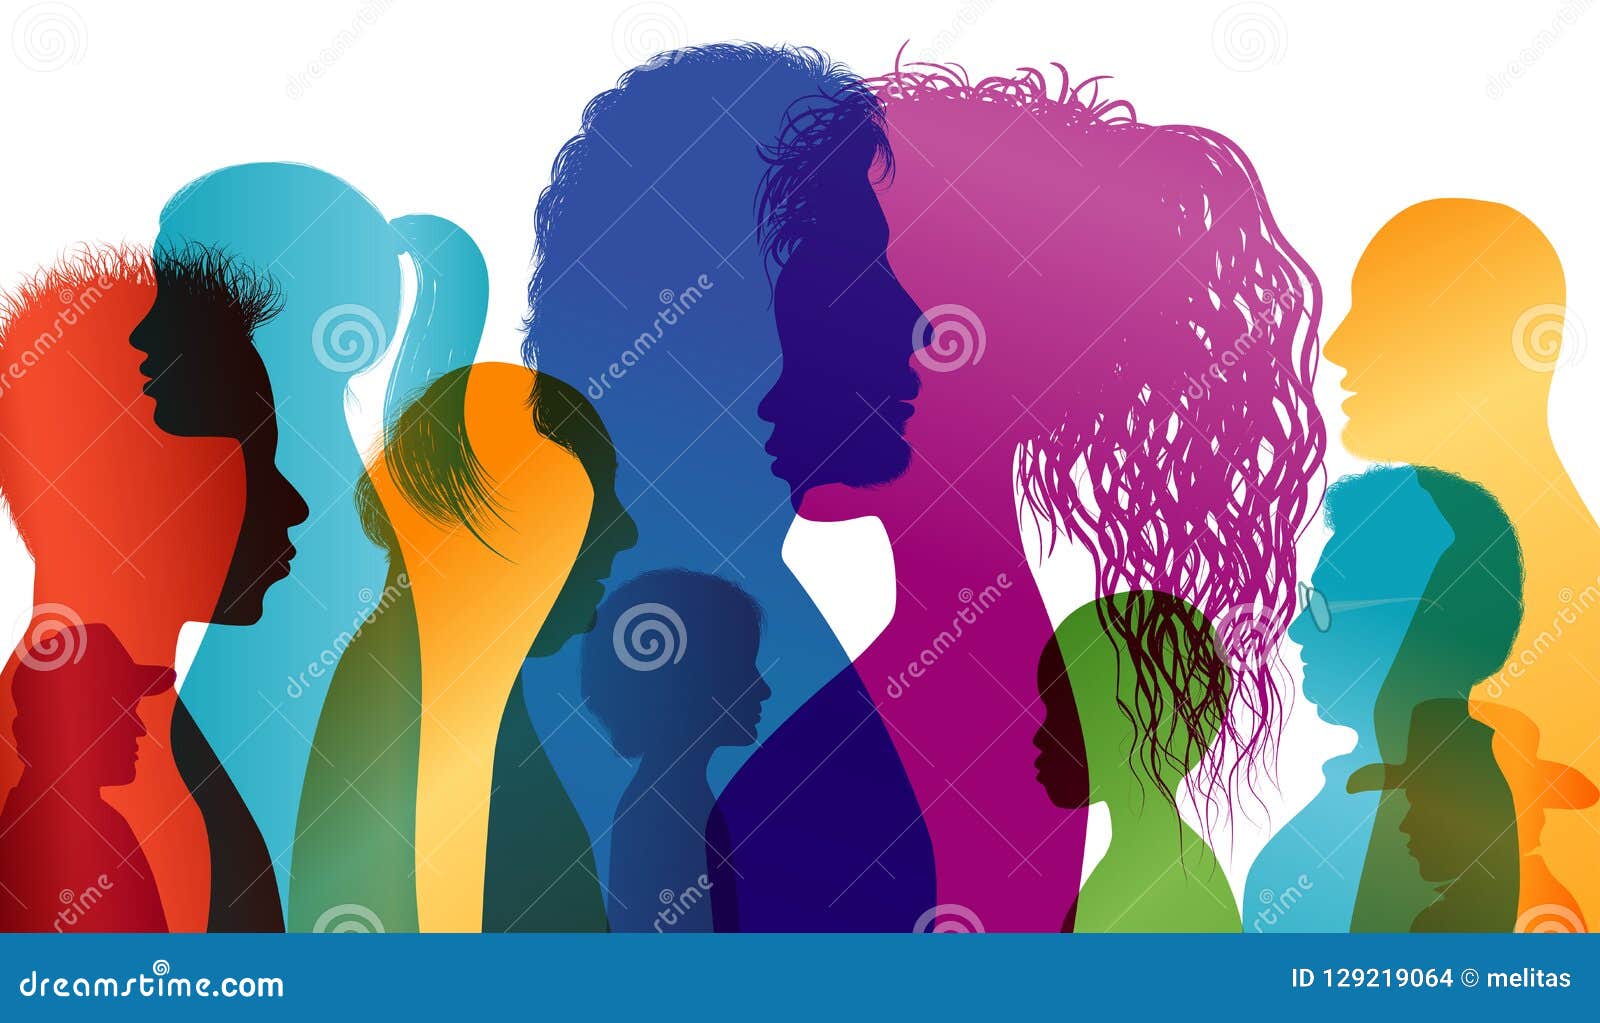 silhouette profiles of multiracial people. intercontinental dialogue. group of people of different ages and nationalities. multipl